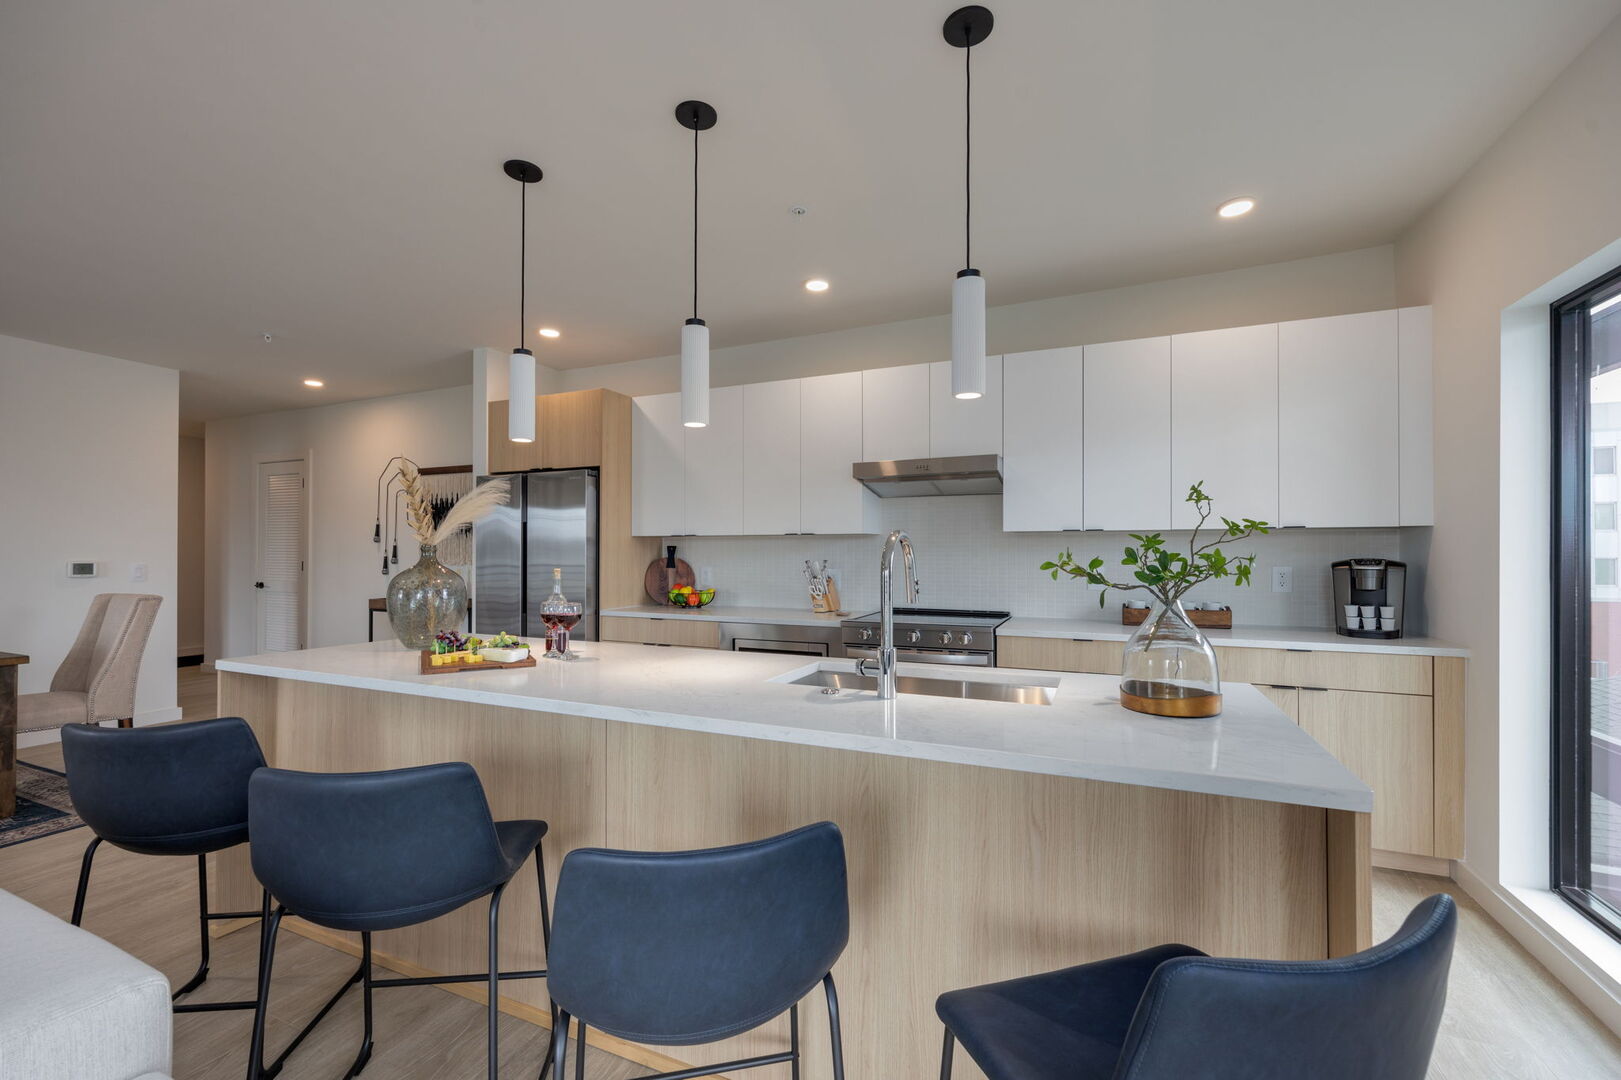 Fully equipped modern kitchen stocked with all culinary essentials and featuring stainless steel appliances with island bar seating.